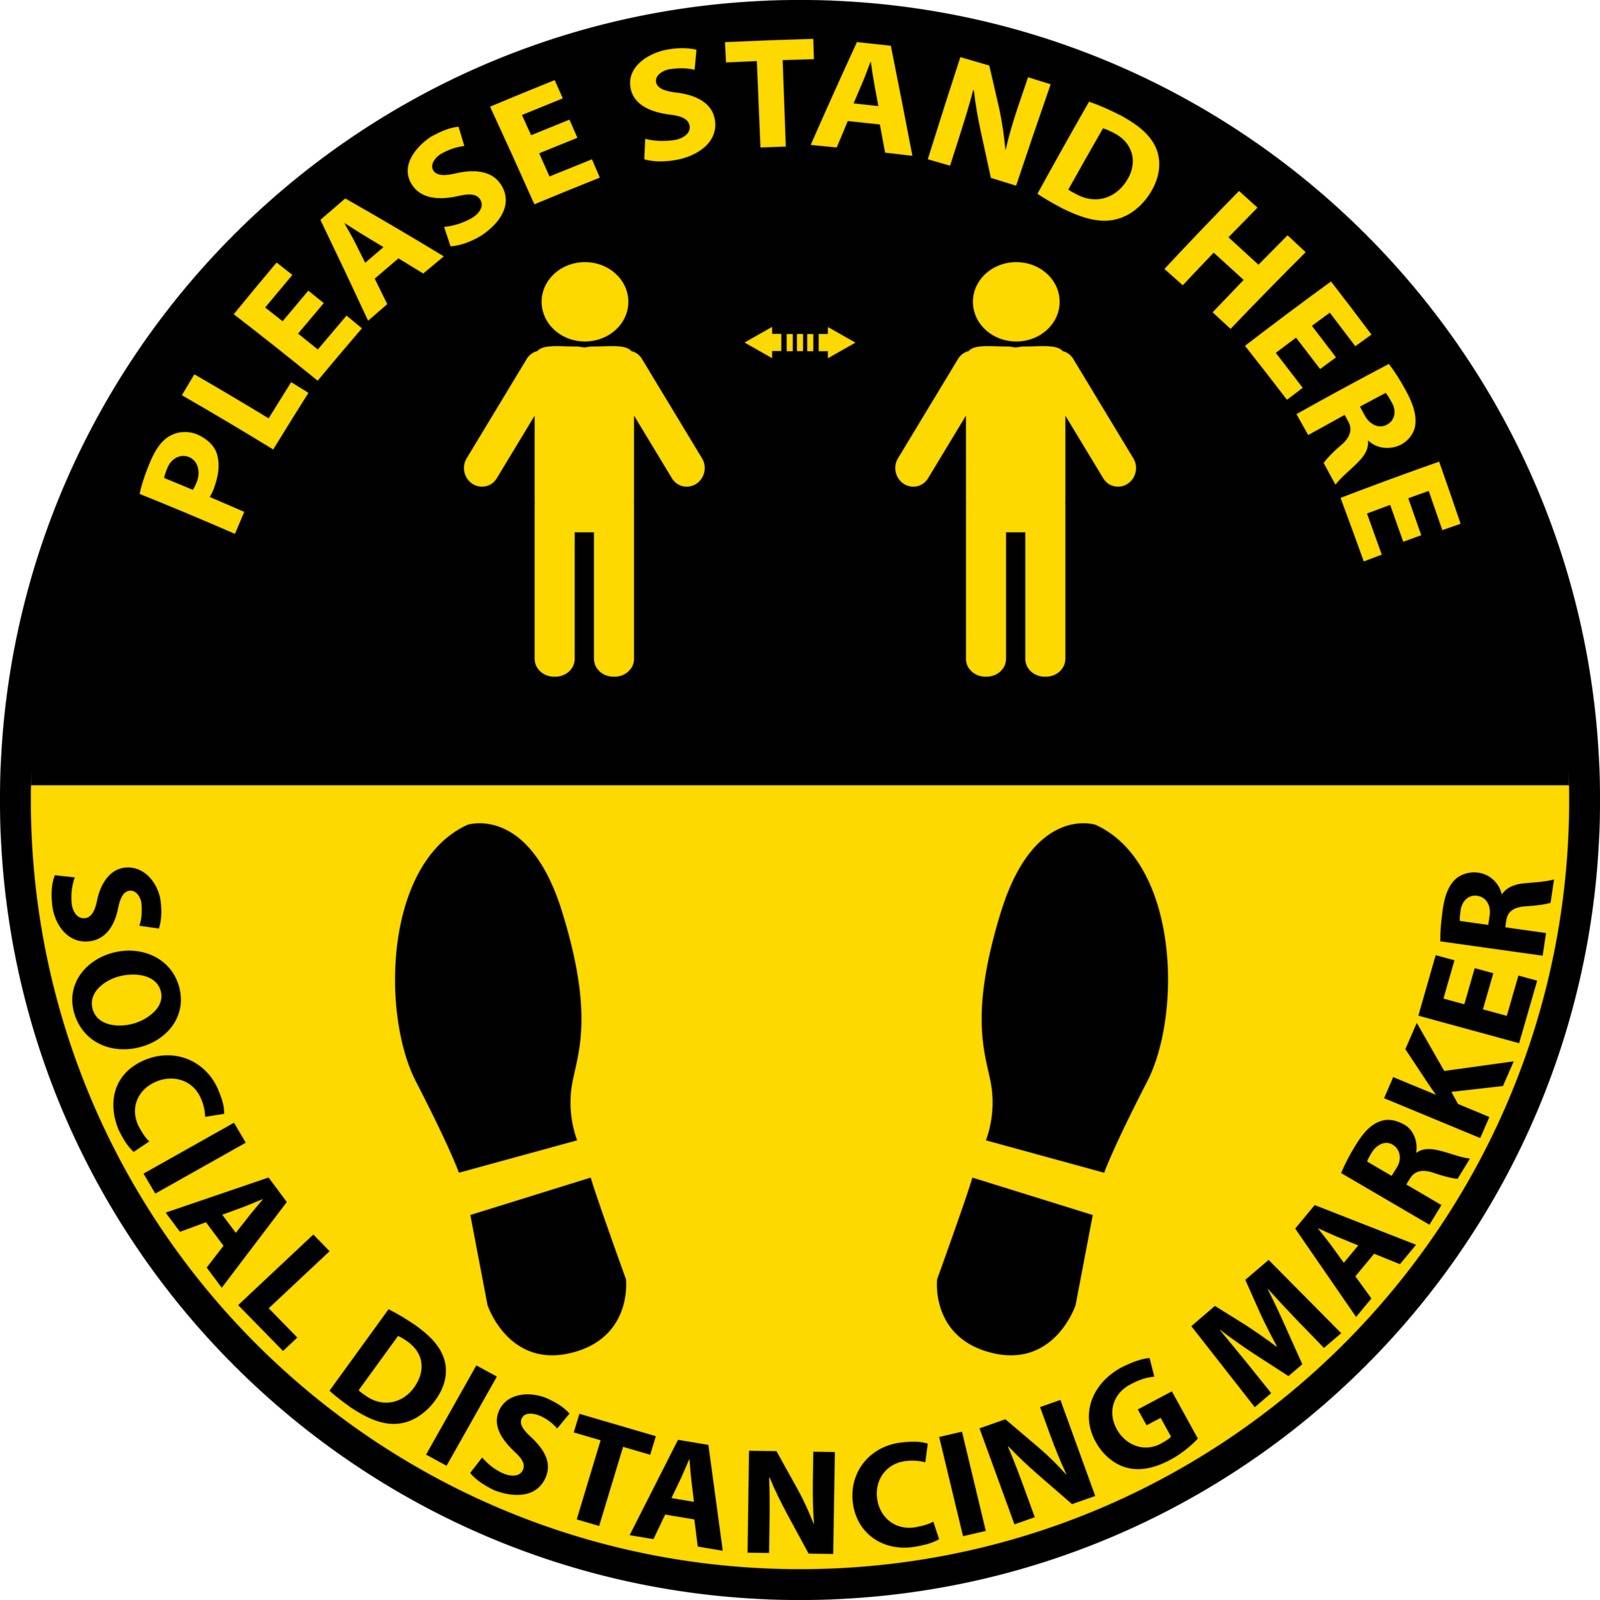 Stand Here Social distancing marker pictogram Icon sign by ardeann